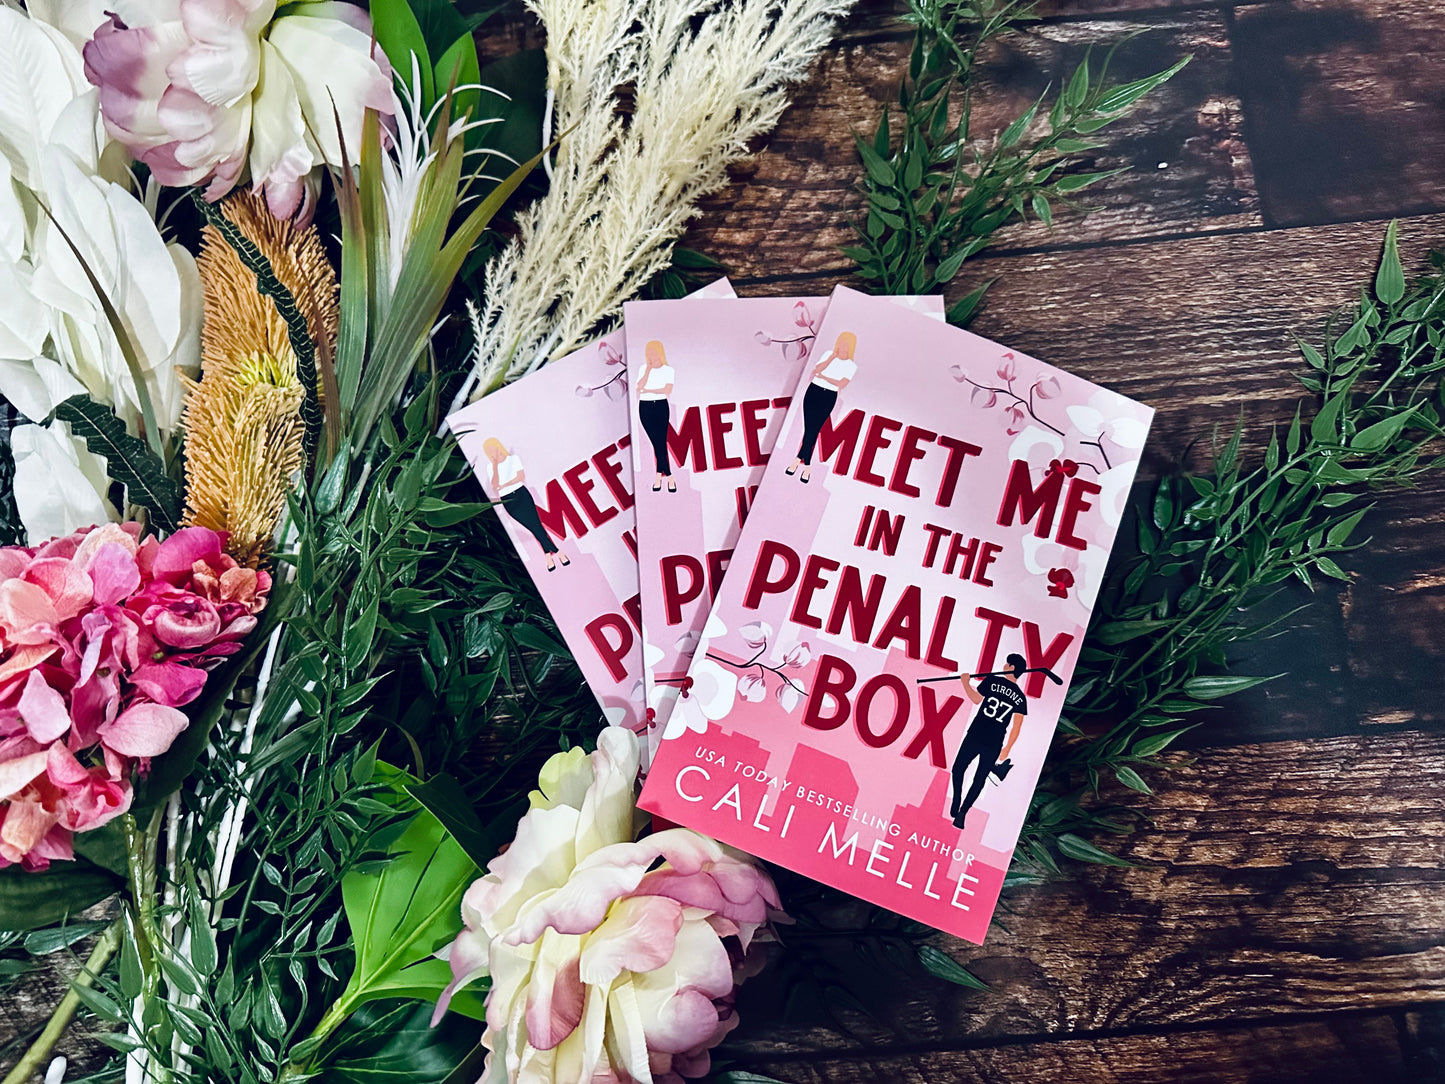 Meet Me in the Penalty Box by Cali Melle (Orchid City Book 1)